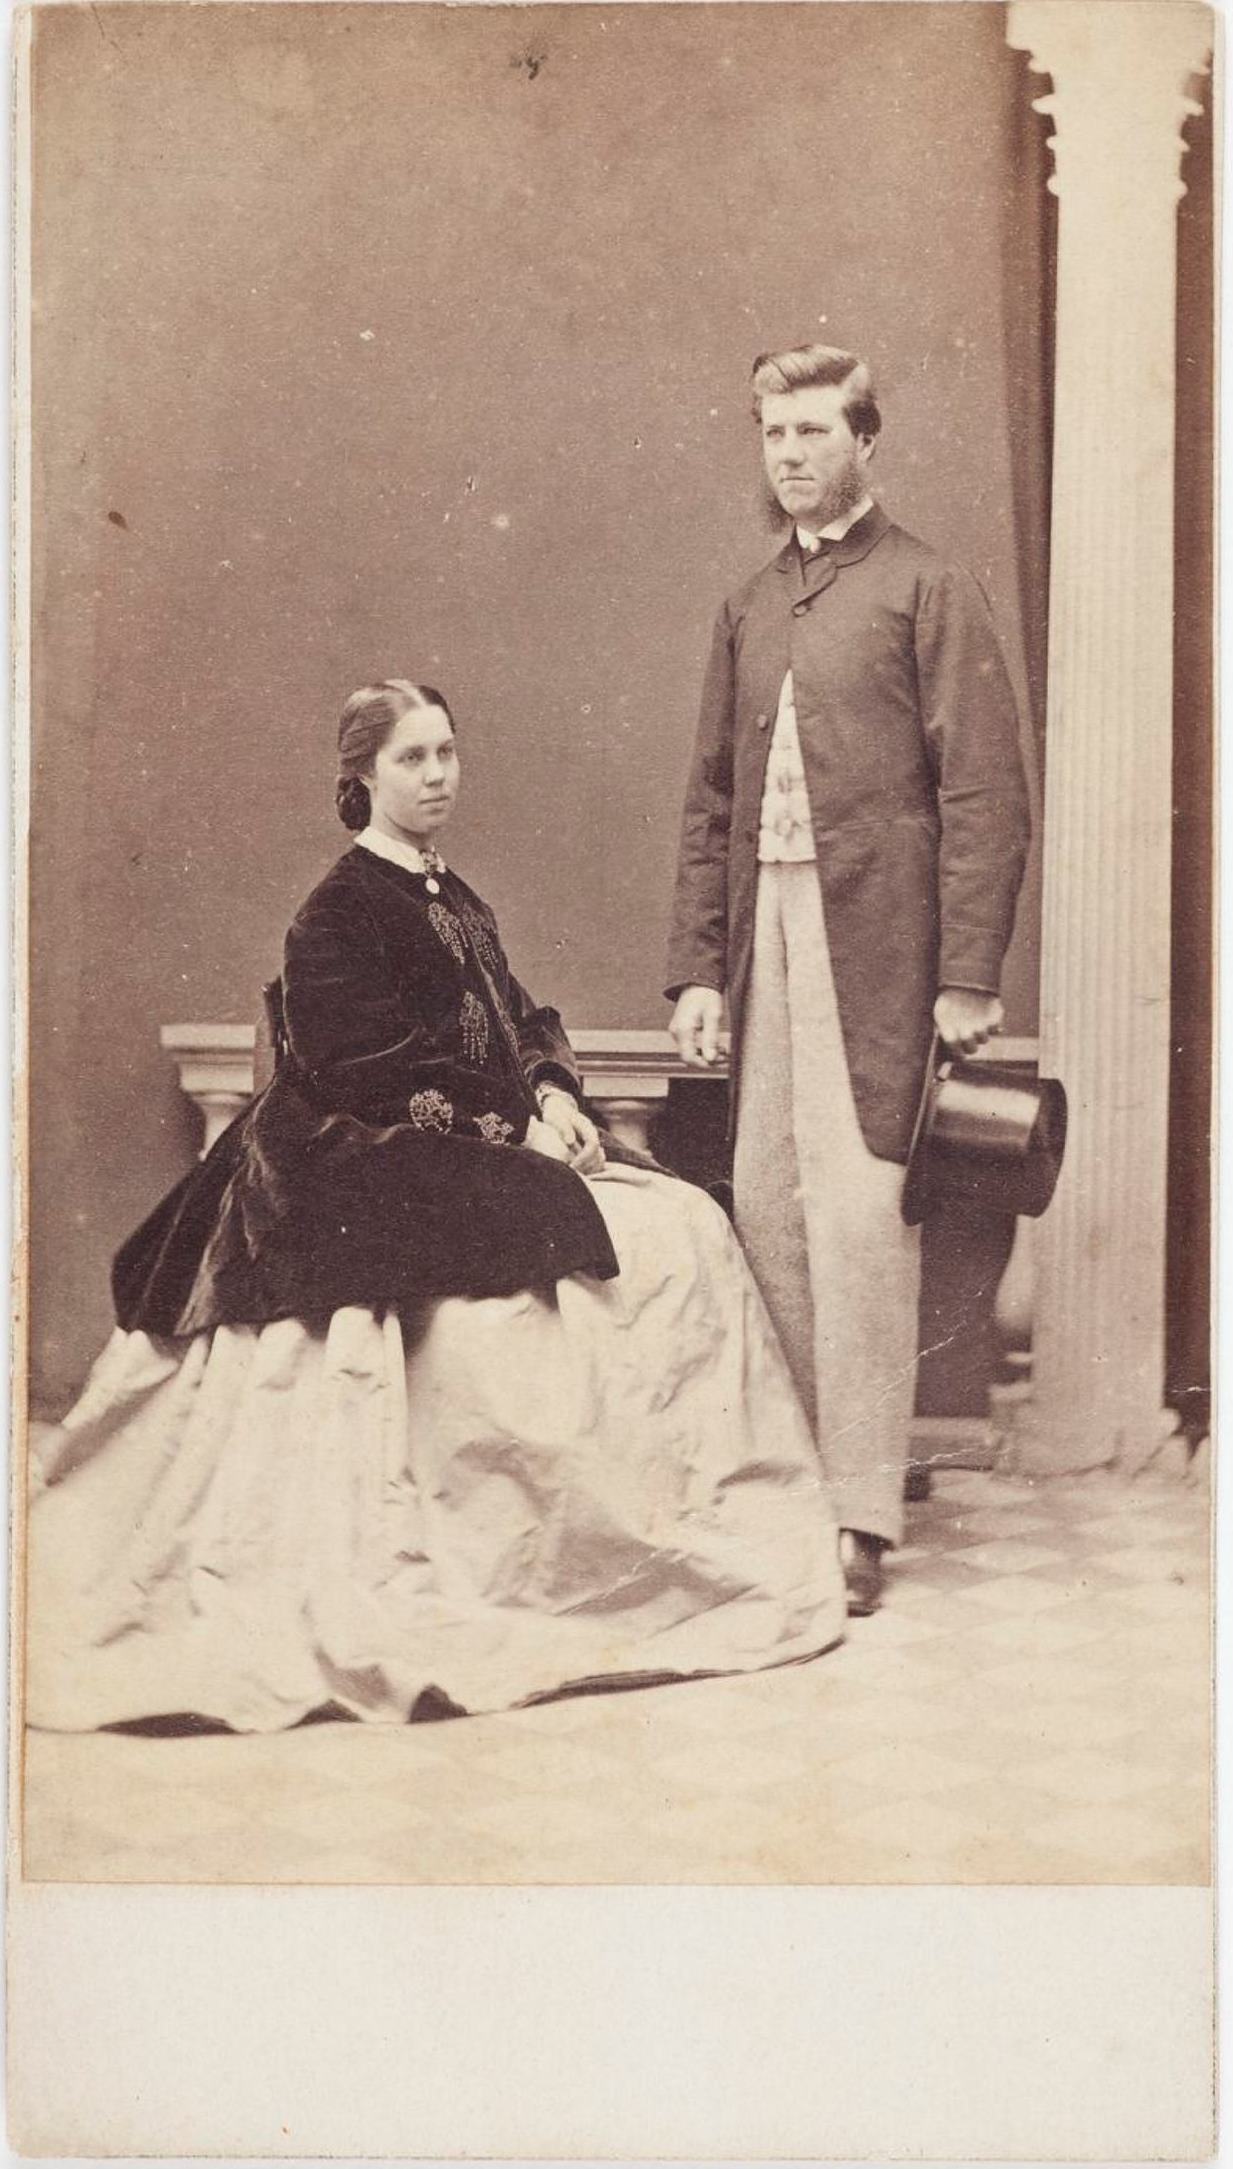 Richard Rouse of Guntawong and his wife Charlotte Emily nee Barnard, around 1865 / photographer unknown